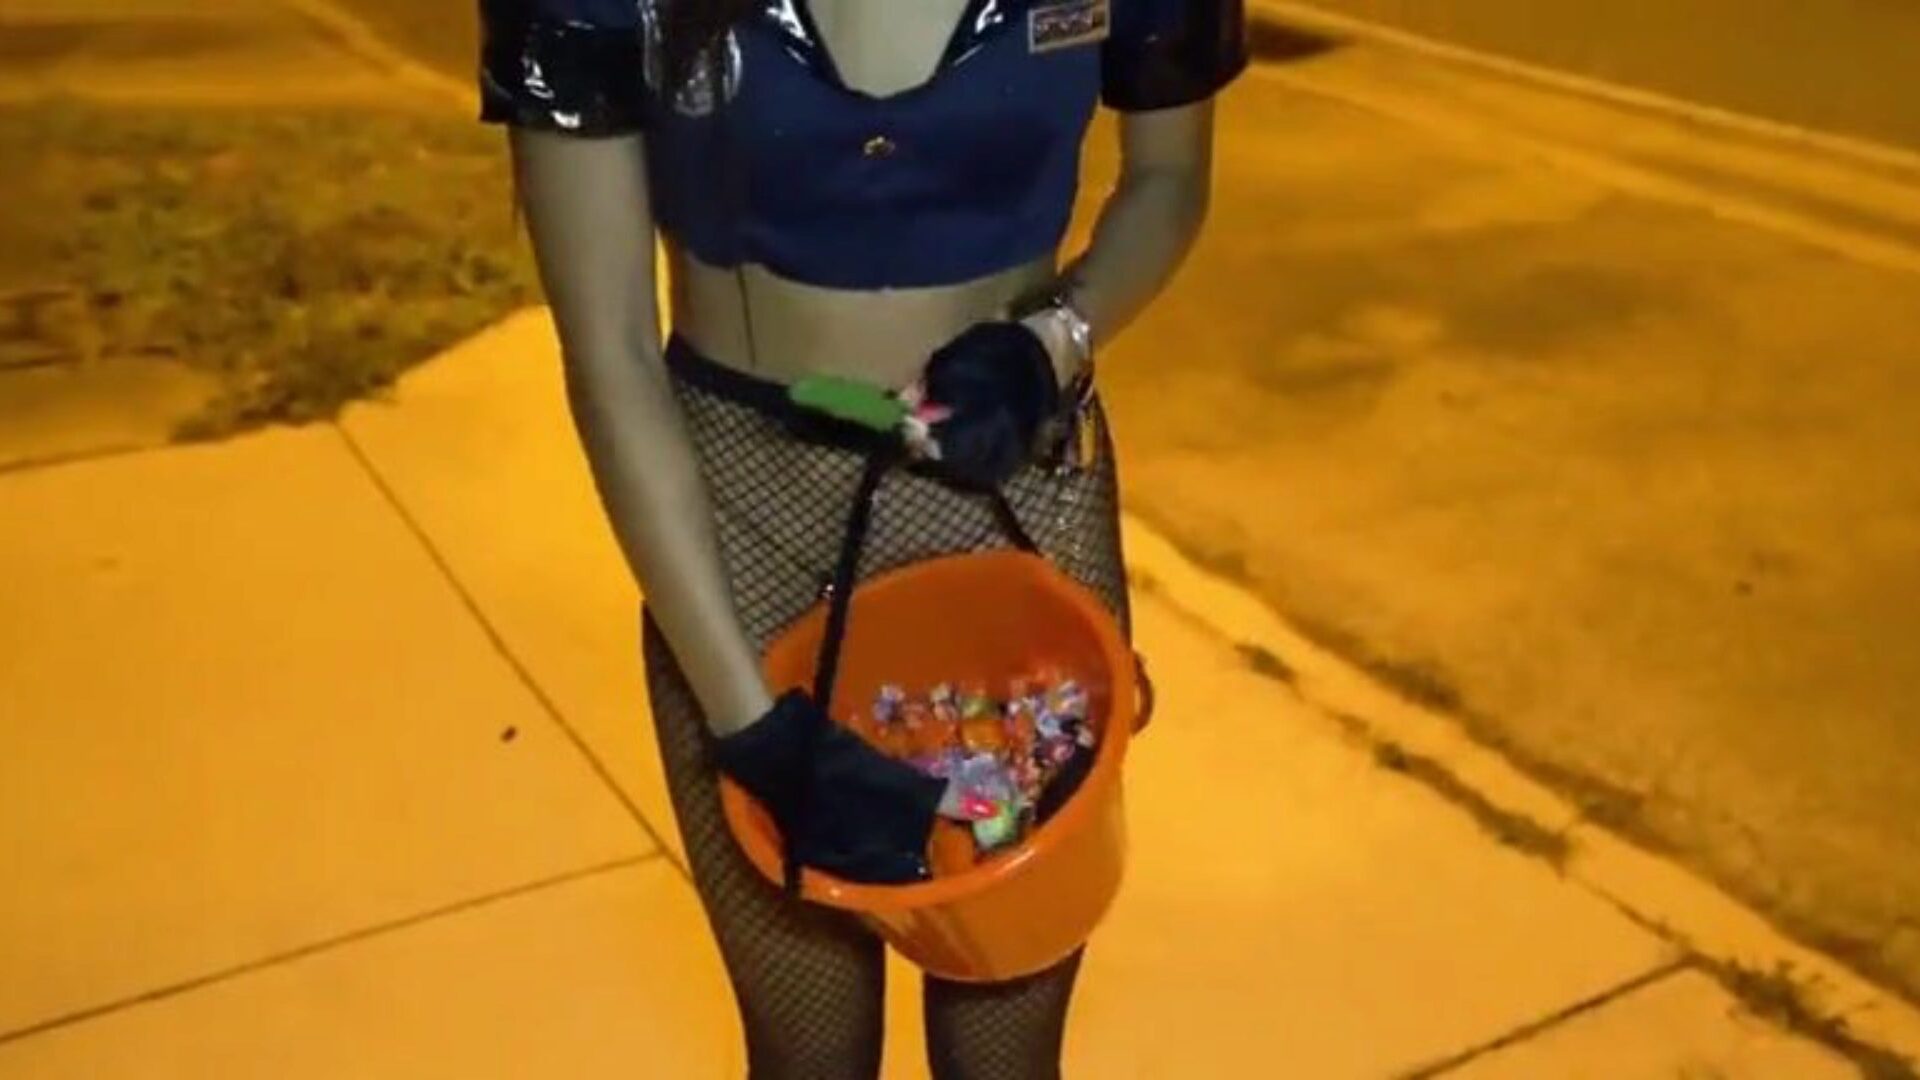 Outdoor multiracial on Halloween with a lewd Asian cop gal Twisted Asian teen Vina Sky decides to suit up as a policewoman. She demonstrates off her ideal gams and constricted ass on the street, not indeed wearing any pants She too demonstrates her diminutive milk shakes at beautiful much every single passing truck It doesn't take very lengthy for this lewd trick or treater to find the chap who's willing to pound her in front of the camera. The boys costume by the way, is exceedingly slothful He wears a clown mask during the time that dressed in a bloodied hatchet. Is he an extra in one of 'em Purge videos or something Vina jams his schlong in her throat after showcasing off her soaked Asian cunt to him. She receives truly dirty with it which prompts the chap to pulverize her mouth even tighter We then watch hard-core standing doggy style orgy with the good-looking Asian seductress. After that, Vina rides his penis in the one and the other reverse and normal cowgirl previous to lastly getting drilled sideways on the random table. For some reason, she wishes this man to internal ejaculation her tight wet crack Will this chab or won't this guy Watch the flick to discover out!